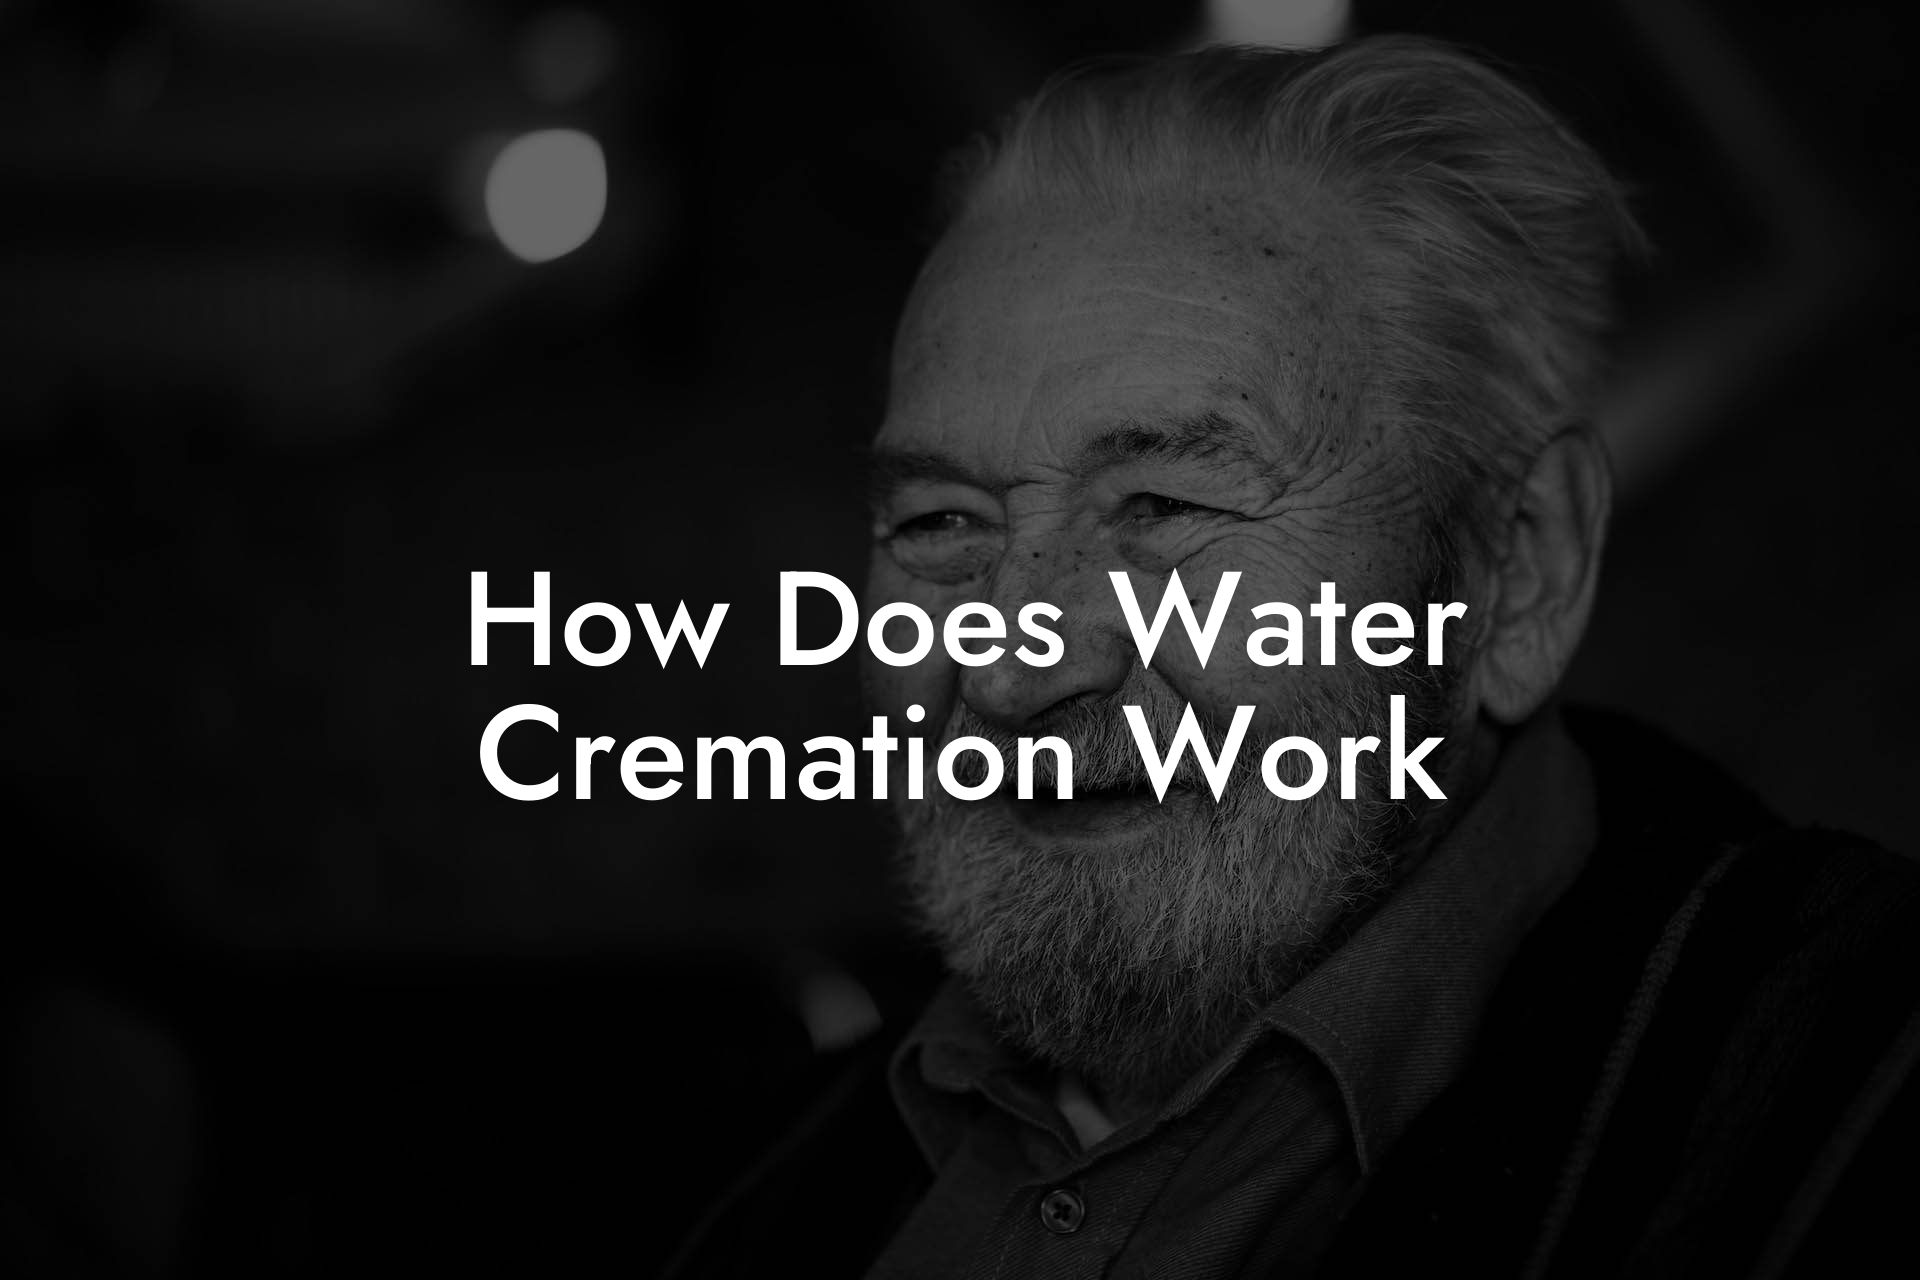 How Does Water Cremation Work